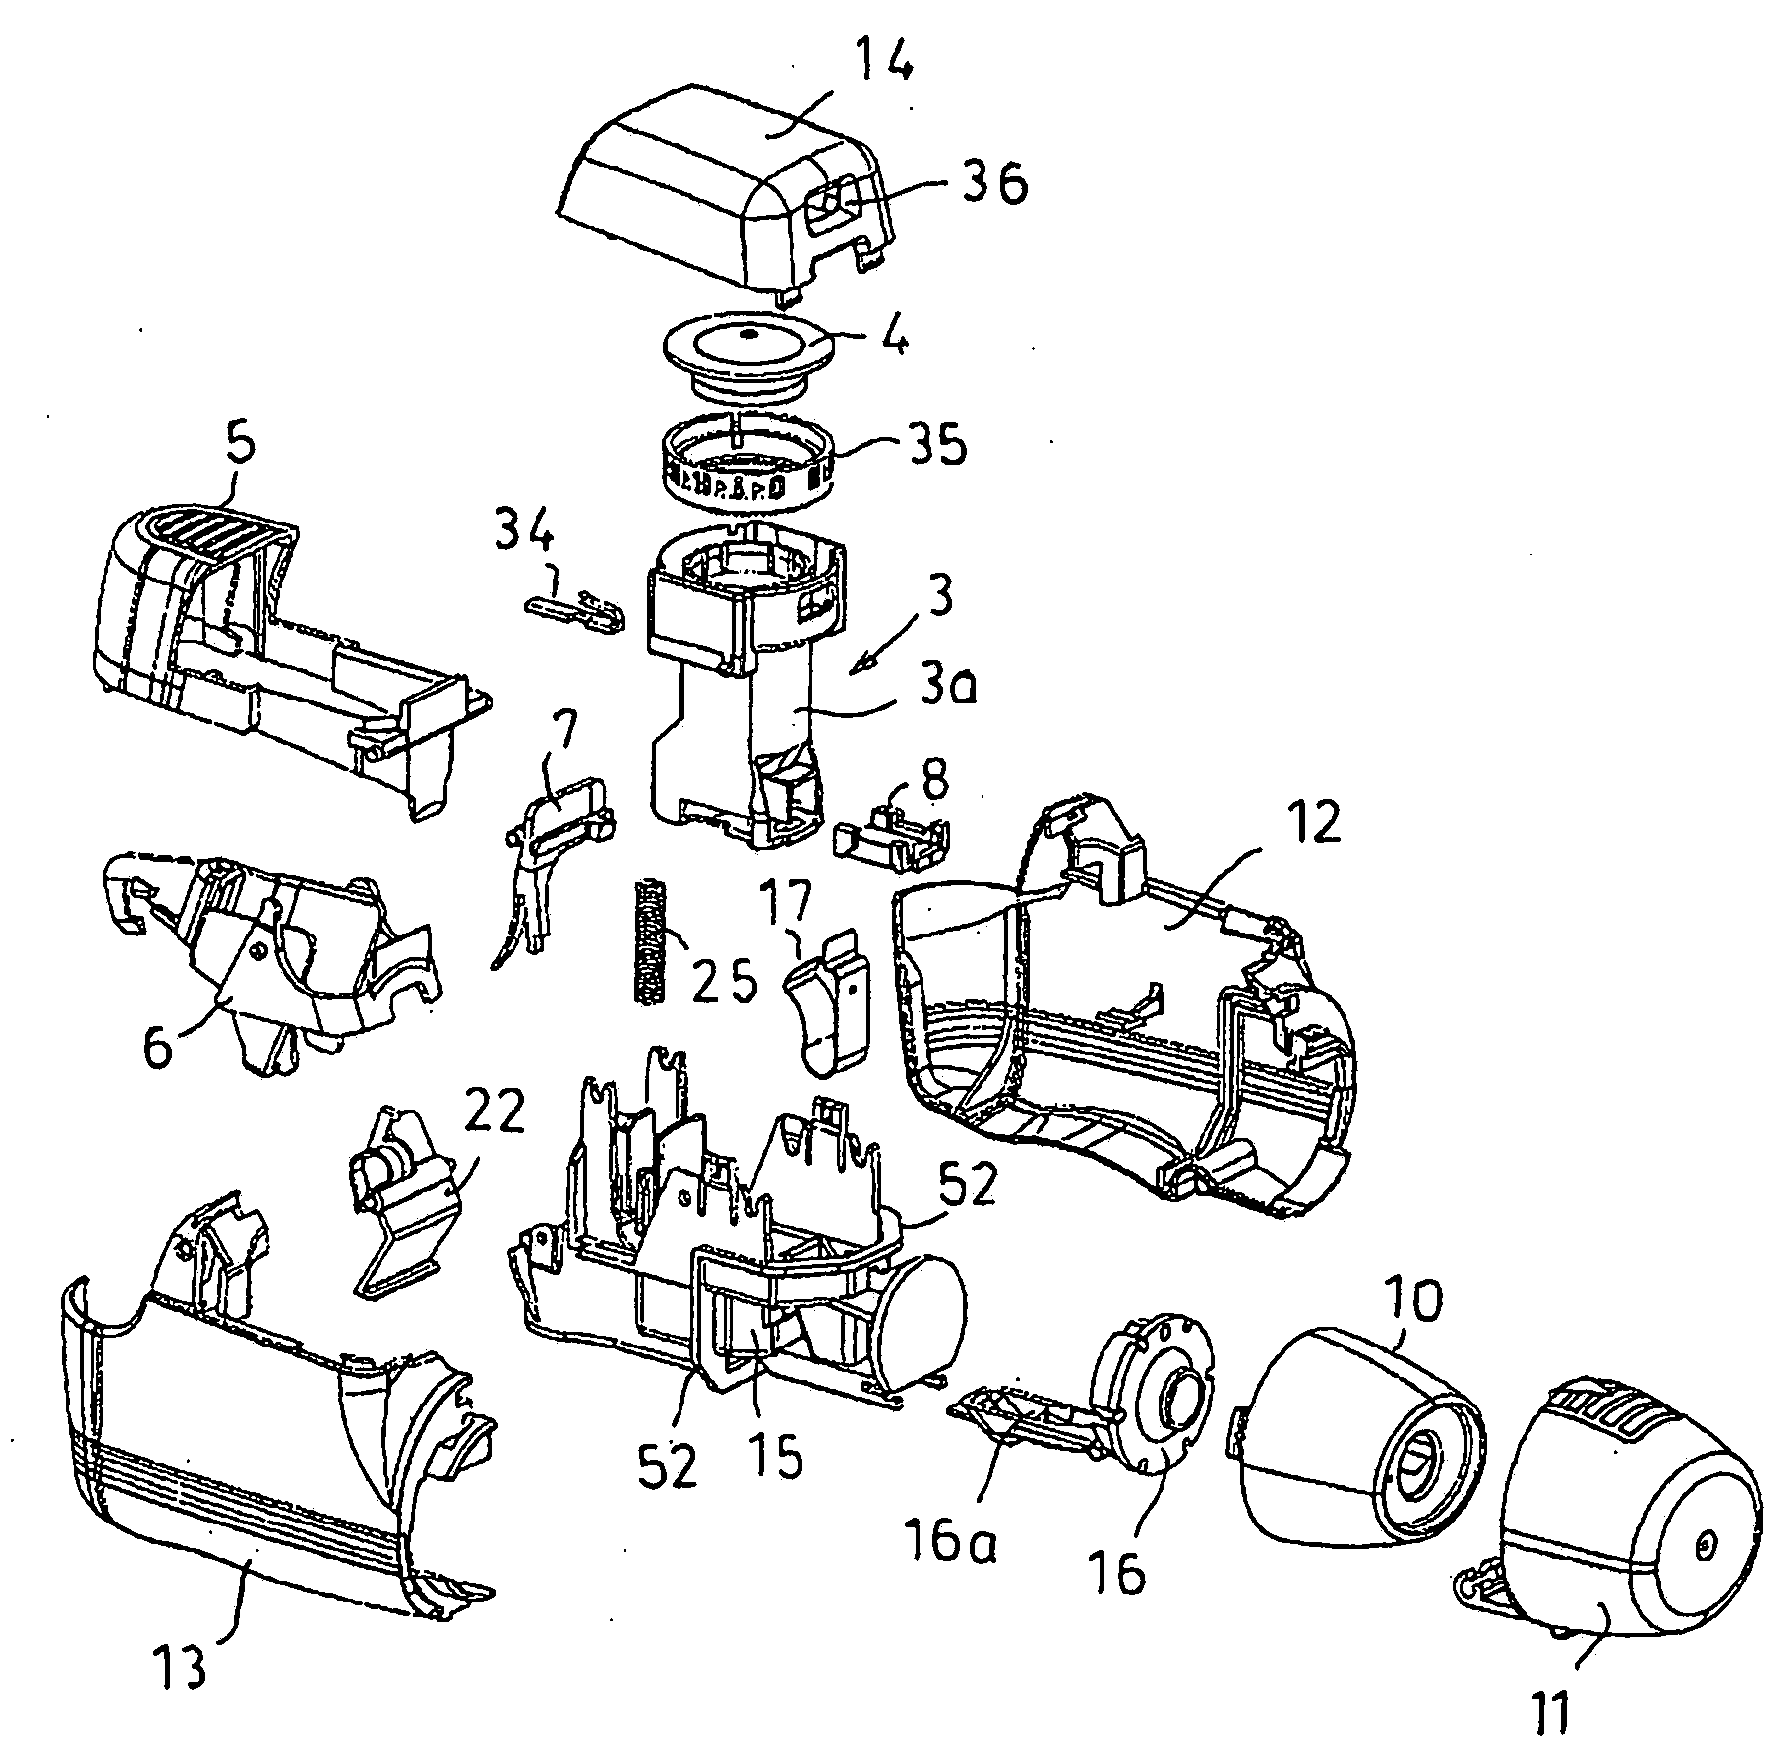 Inhalation device for powdered drugs